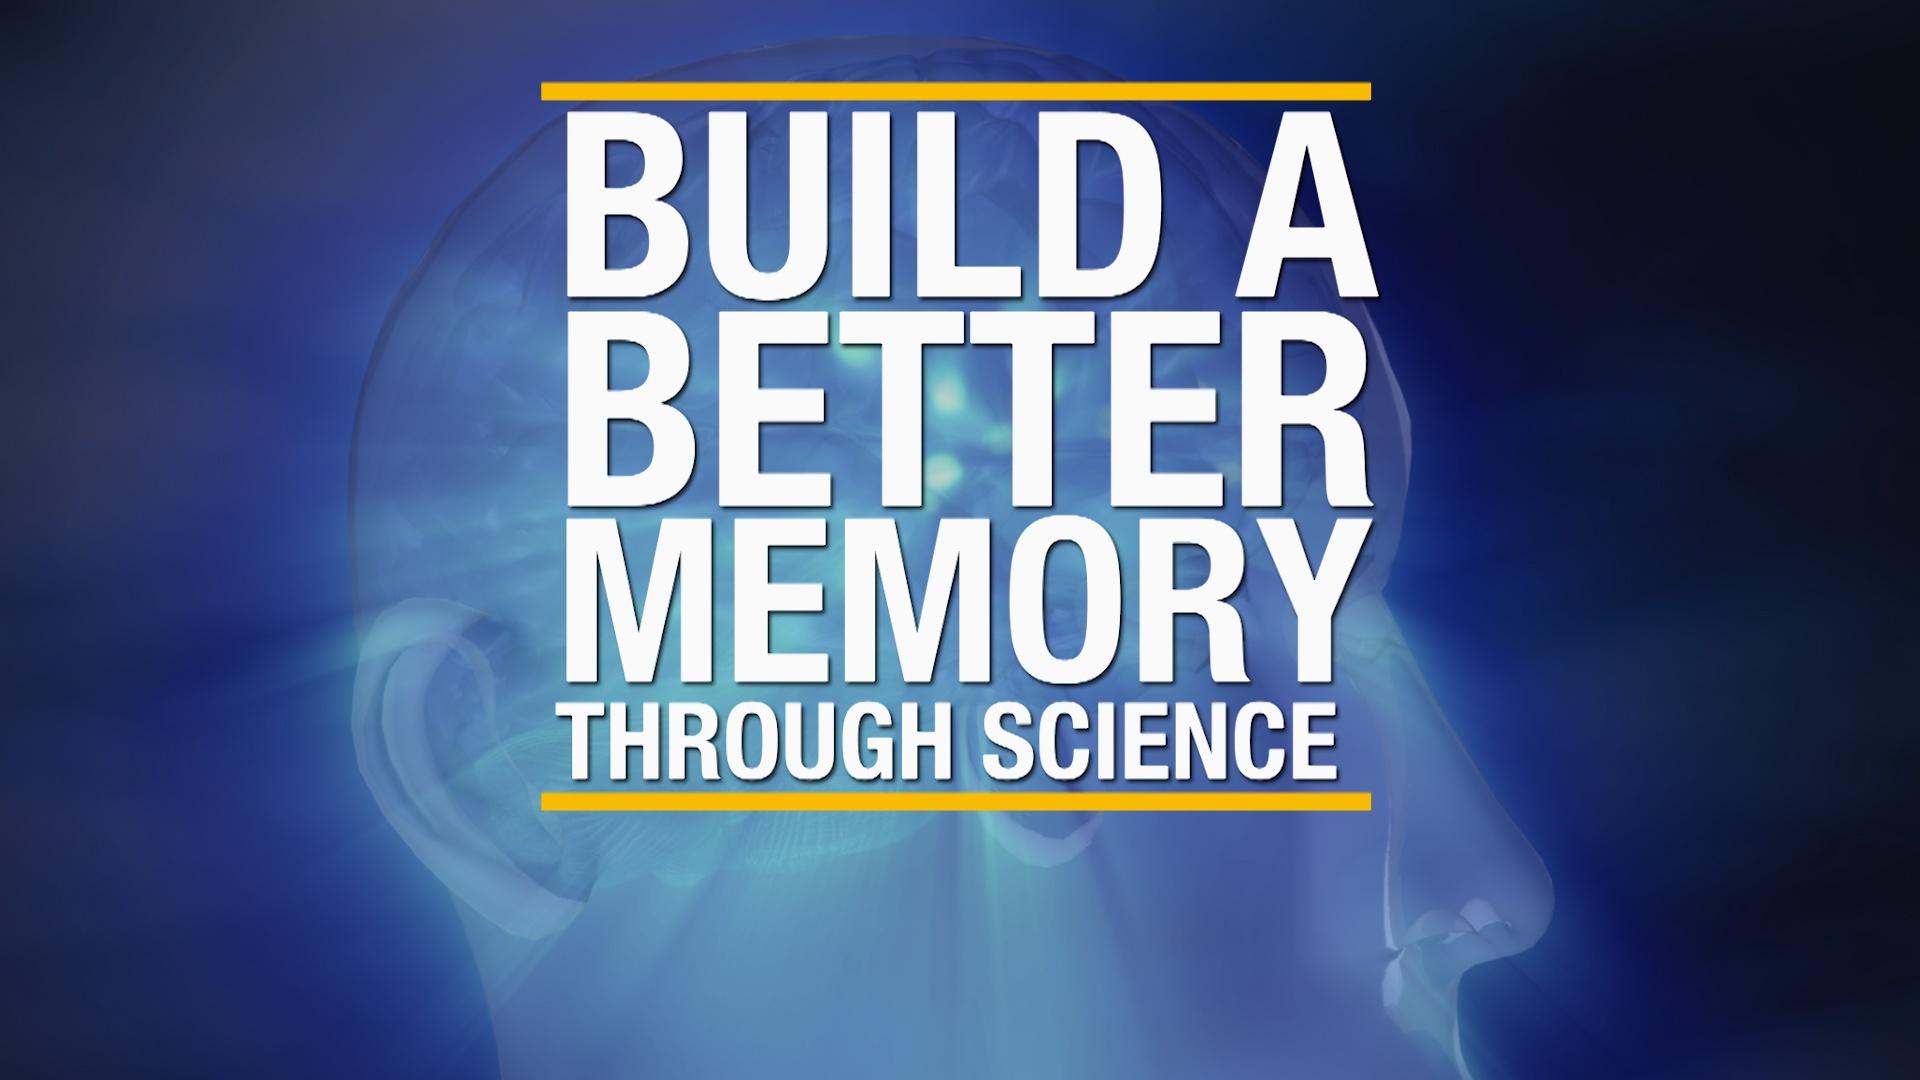 Build a Better Memory Through Science